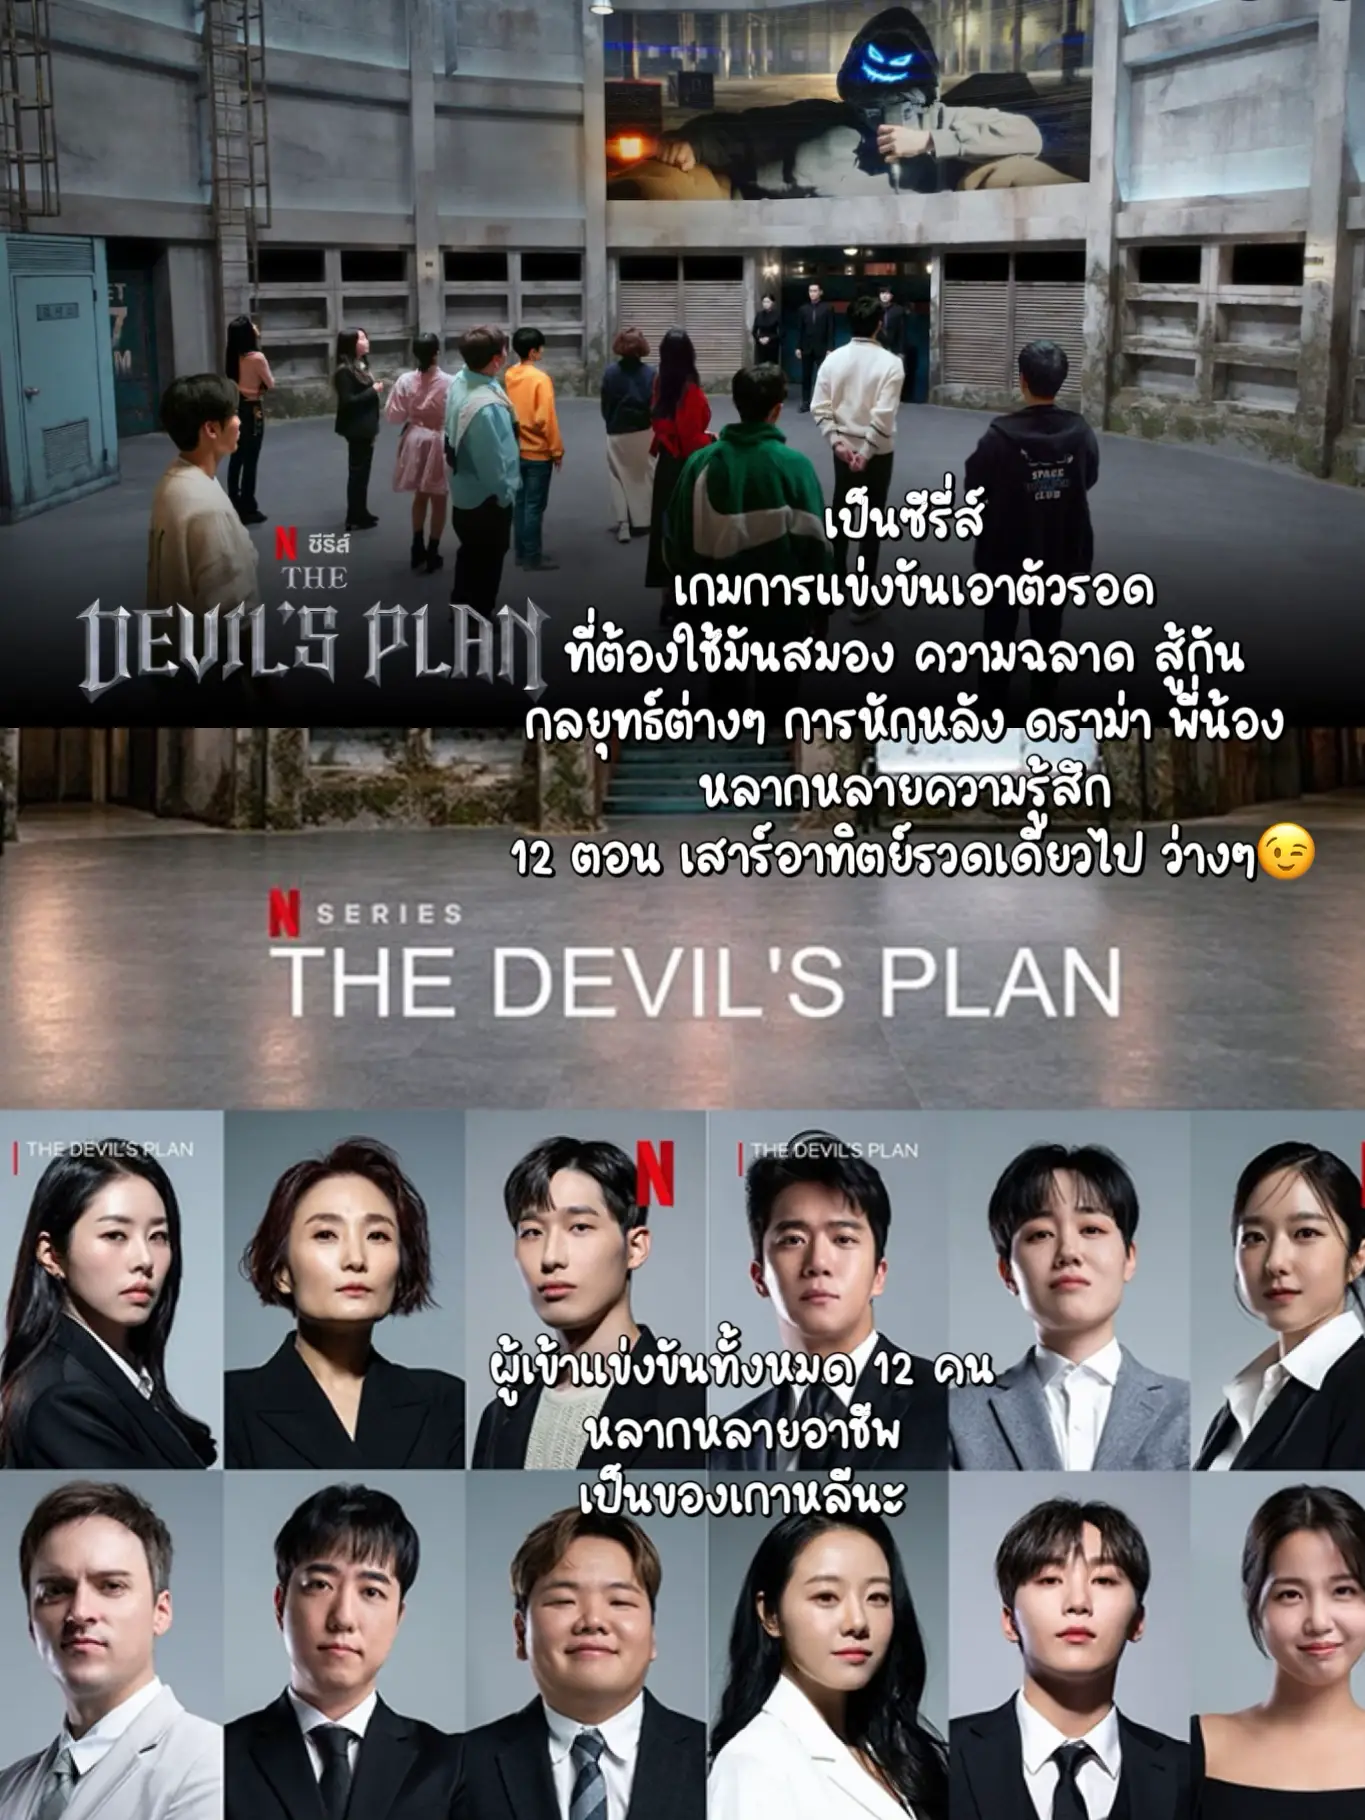 New Netflix Survival Game Show “The Devil's Plan” By “The Great